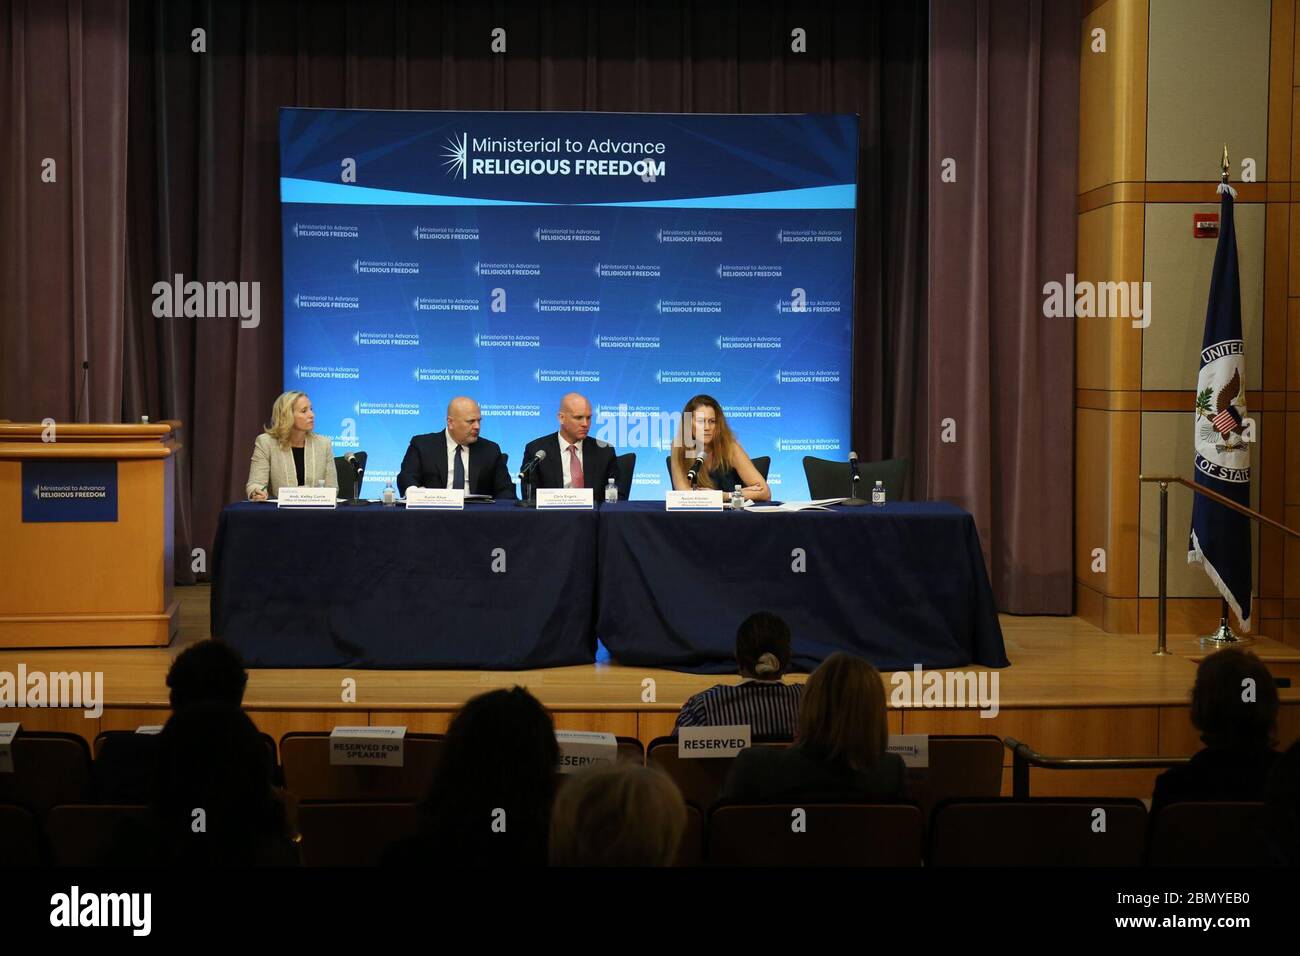 2019 Ministerial to Advance Religious Freedom Acting Director of the Simon-Skjodt Center for Prevention of Genocide Naomi Kikoler speaks on a panel at the Ministerial to Advance Religious Freedom at the U.S. Department of State in Washington D.C. on July 17, 2019. Stock Photo